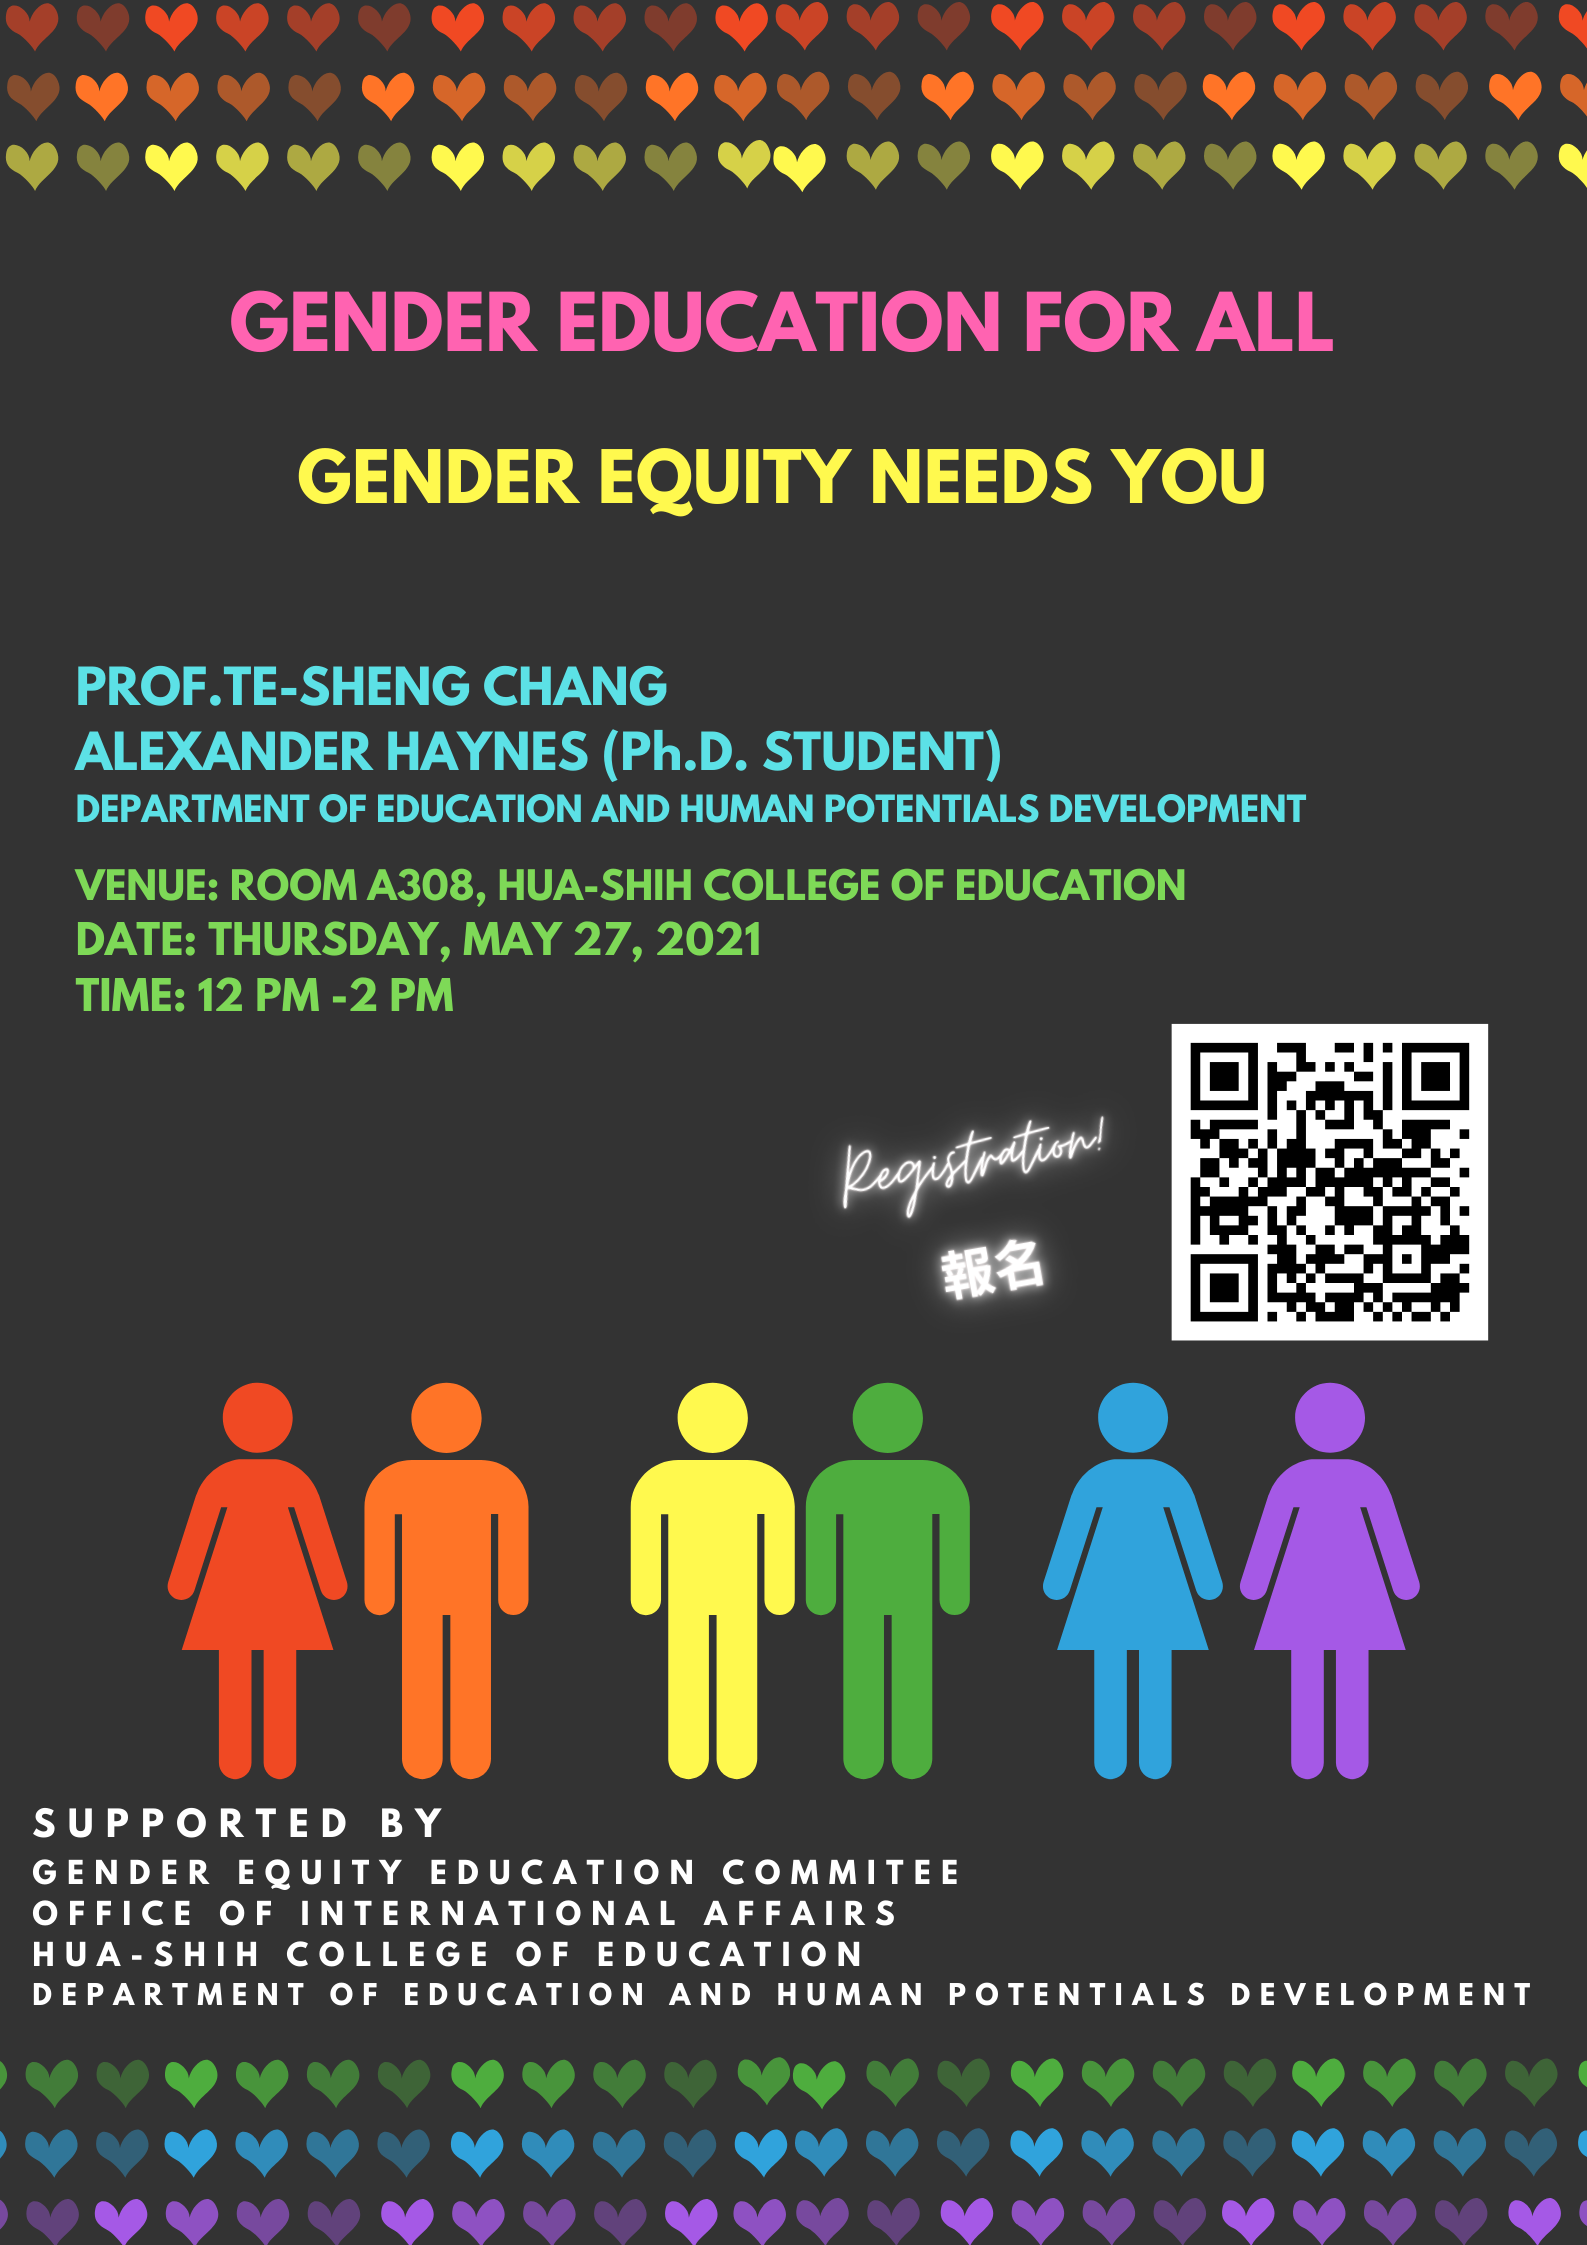 The Gender Education for All: Gender Equity Needs You